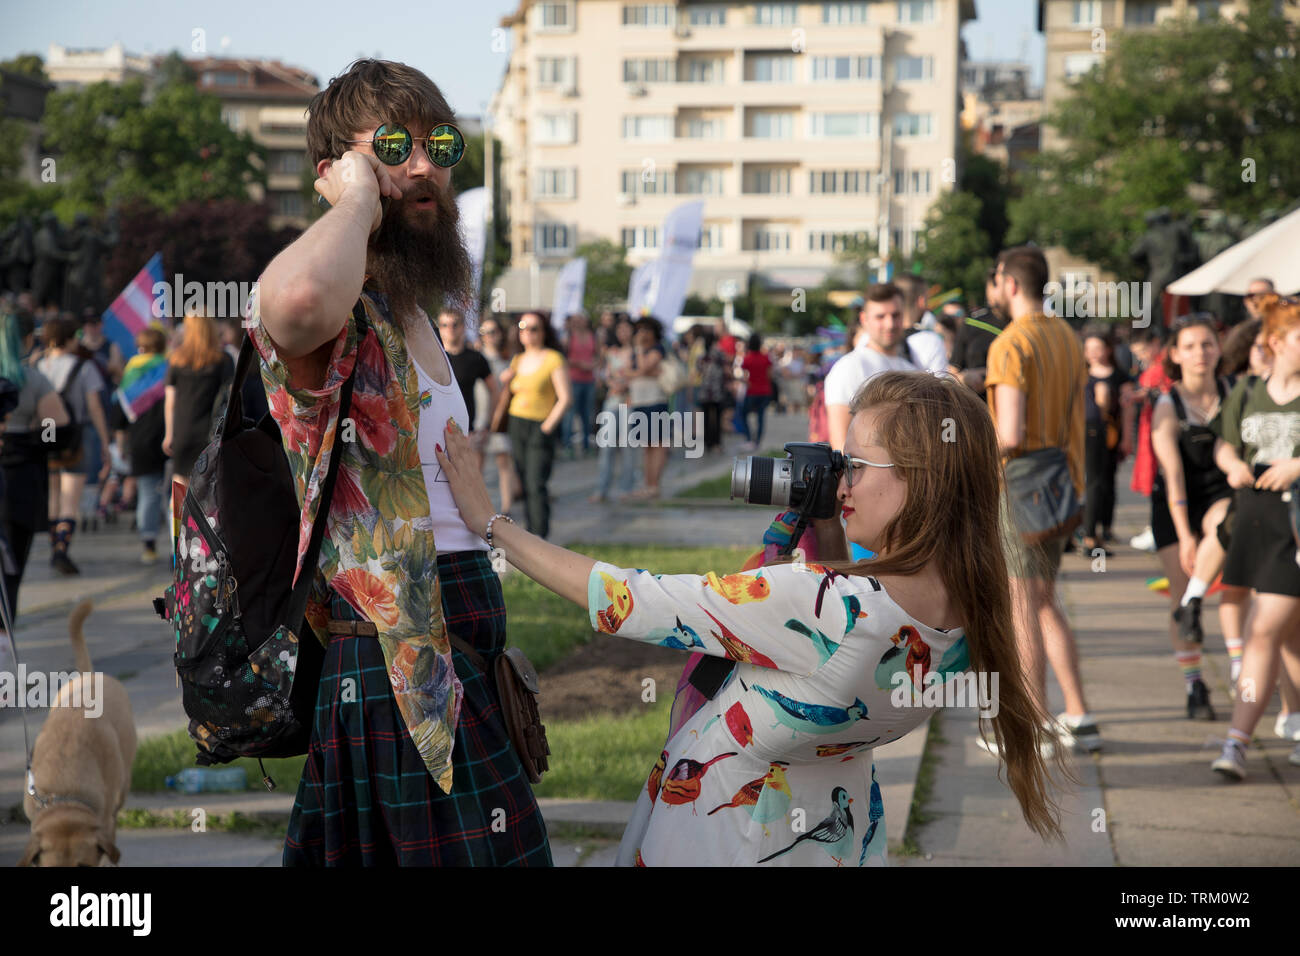 Sofia, Bulgaria - June 08, 2019: Sofia Pride is the biggest annual event dedicated to the equality and human rights of all citizens and the biggest Stock Photo